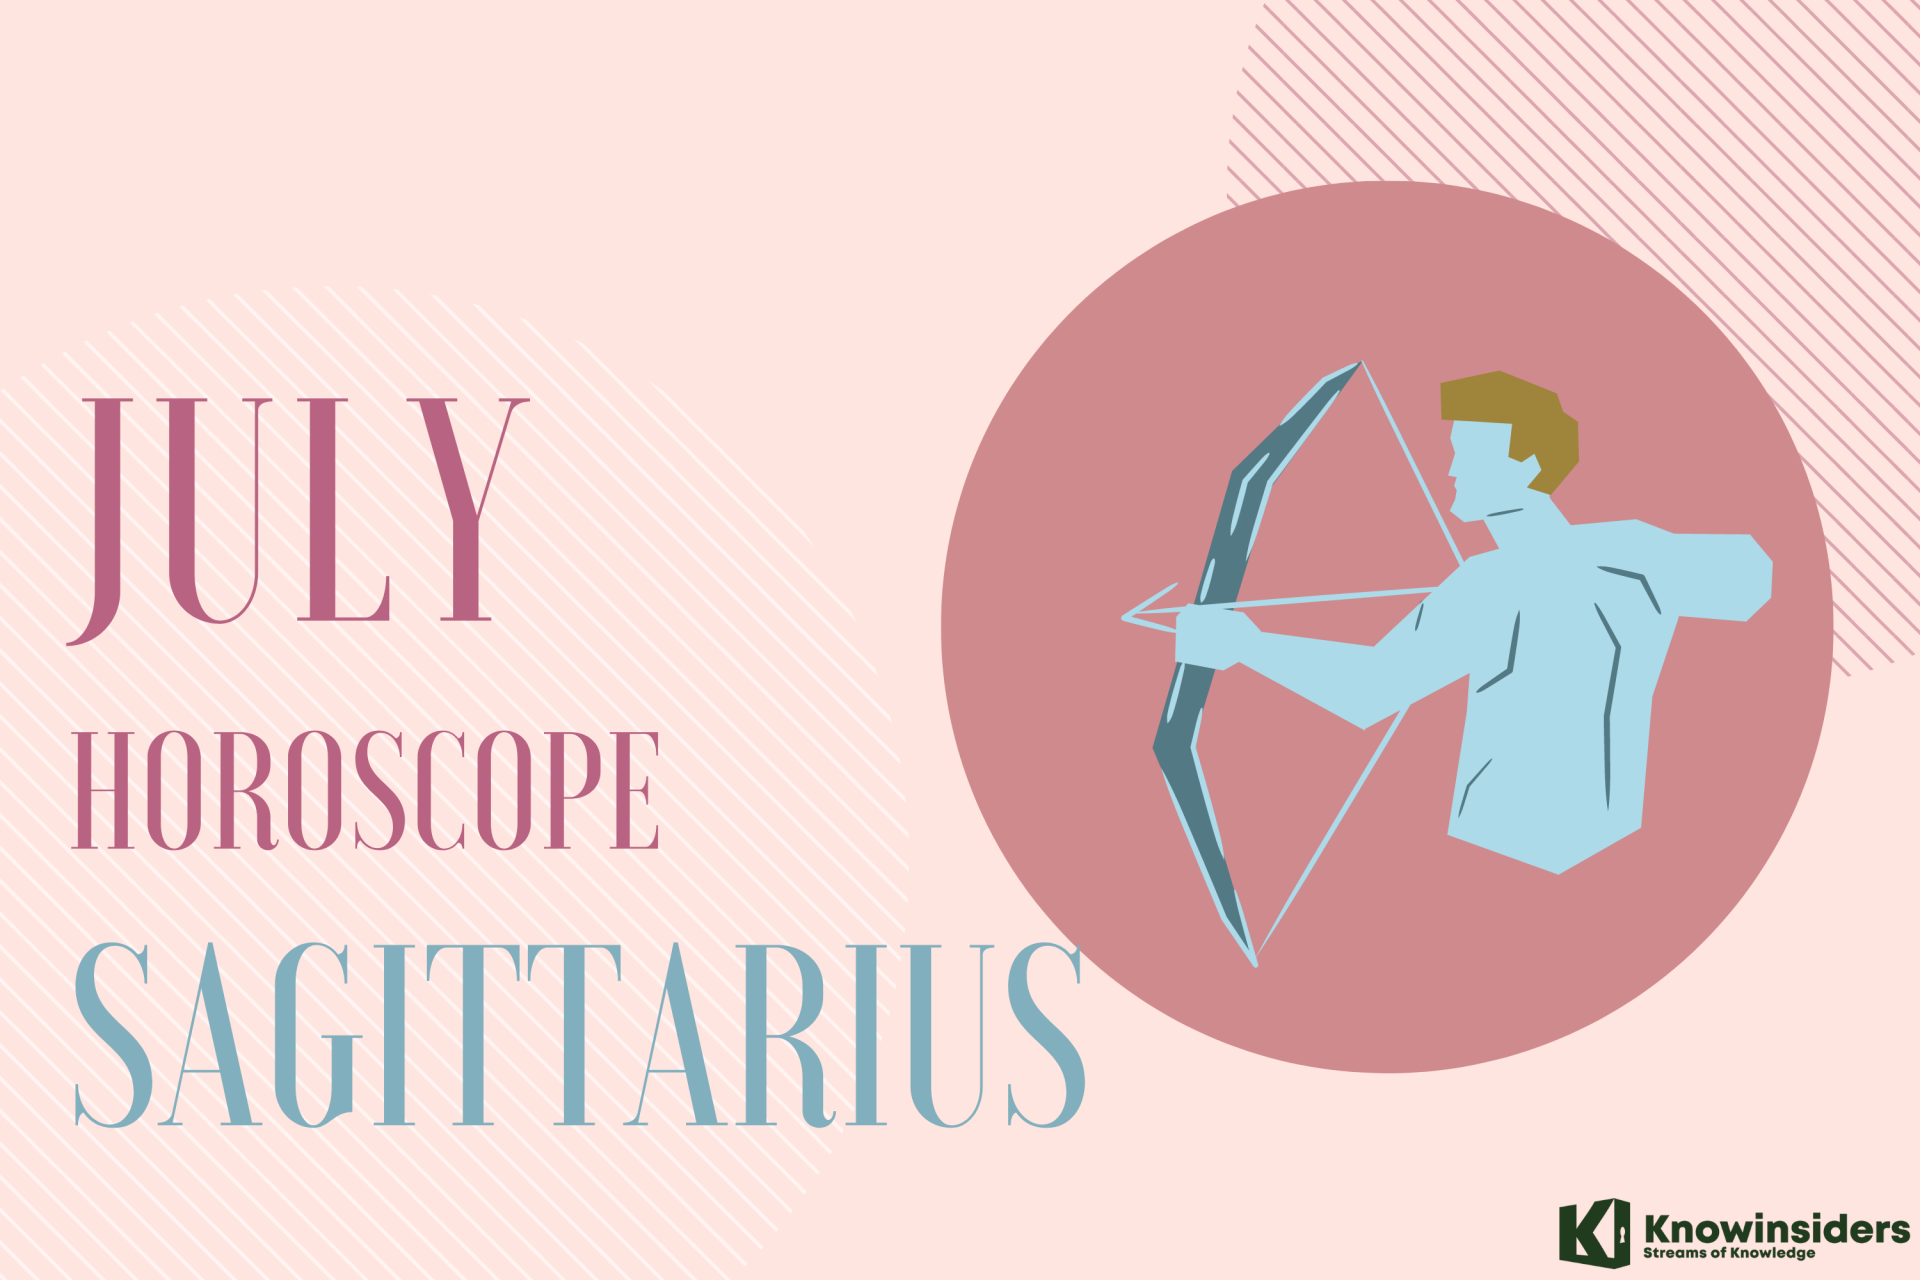 SAGITTARIUS July 2022 Horoscope: Monthly Prediction for Love, Career, Money and Health